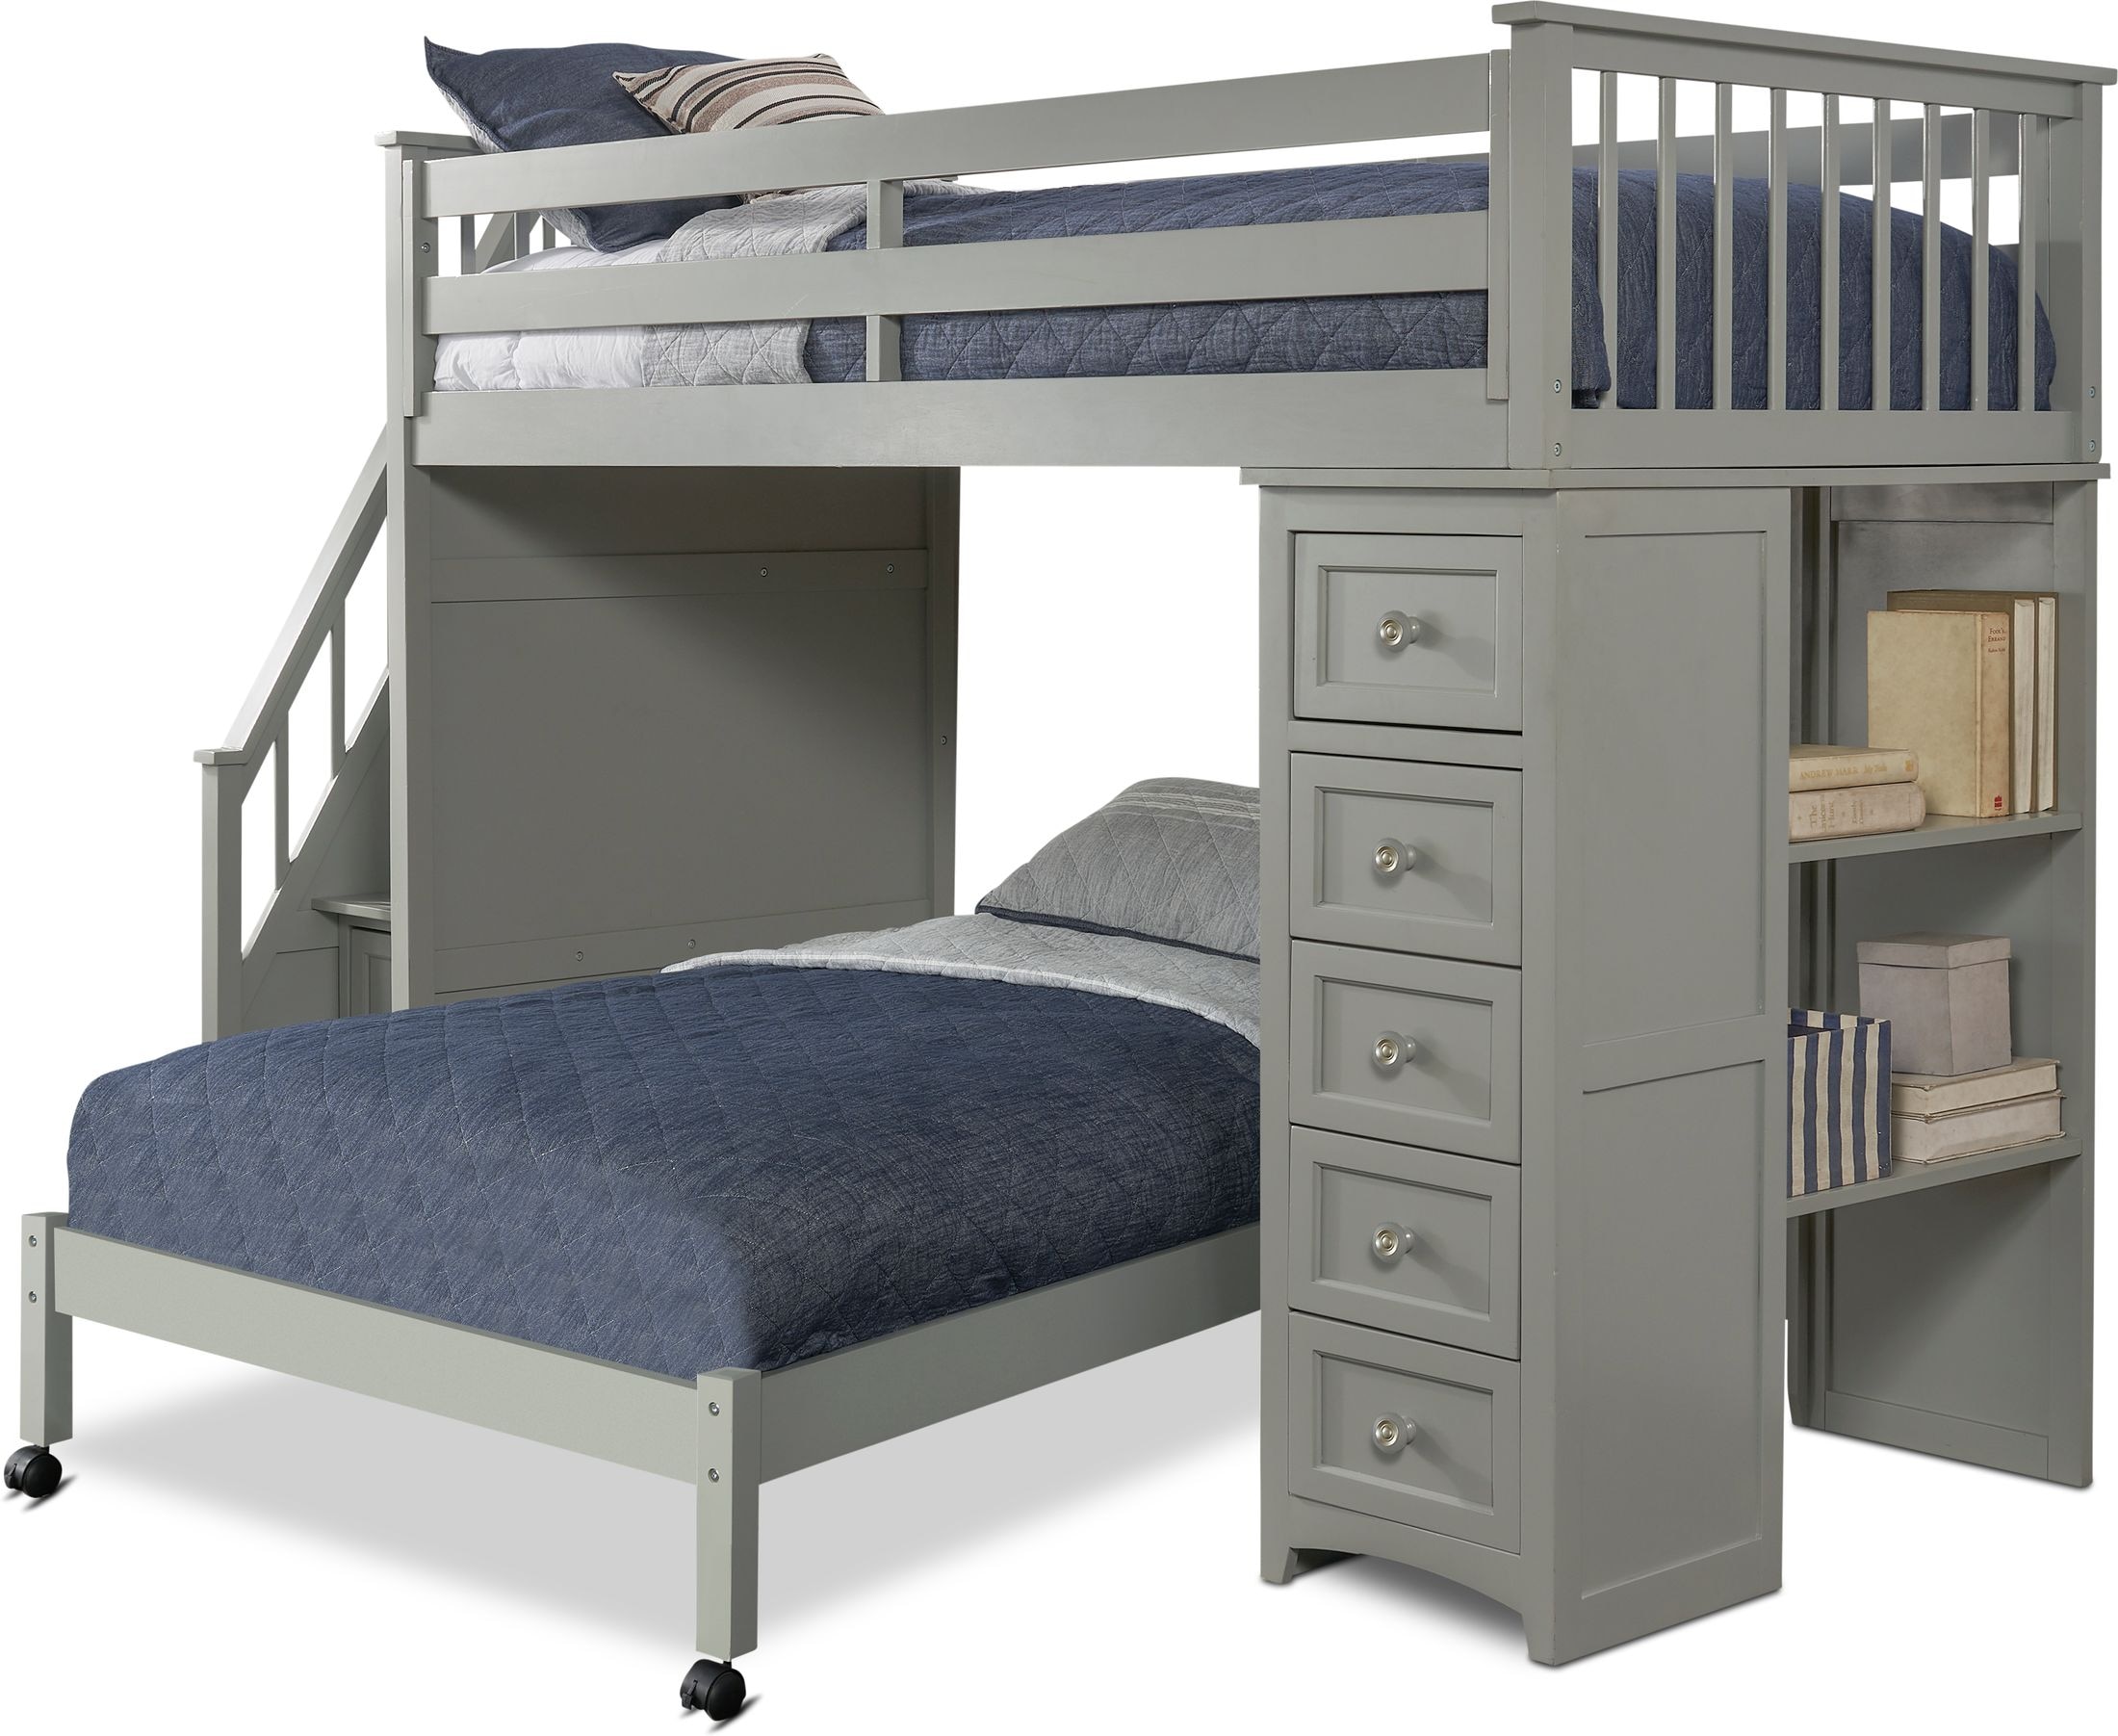 Twin Bed Frame With Desk Er Than, Alcester Twin Low Loft Bed With Desk And Storage